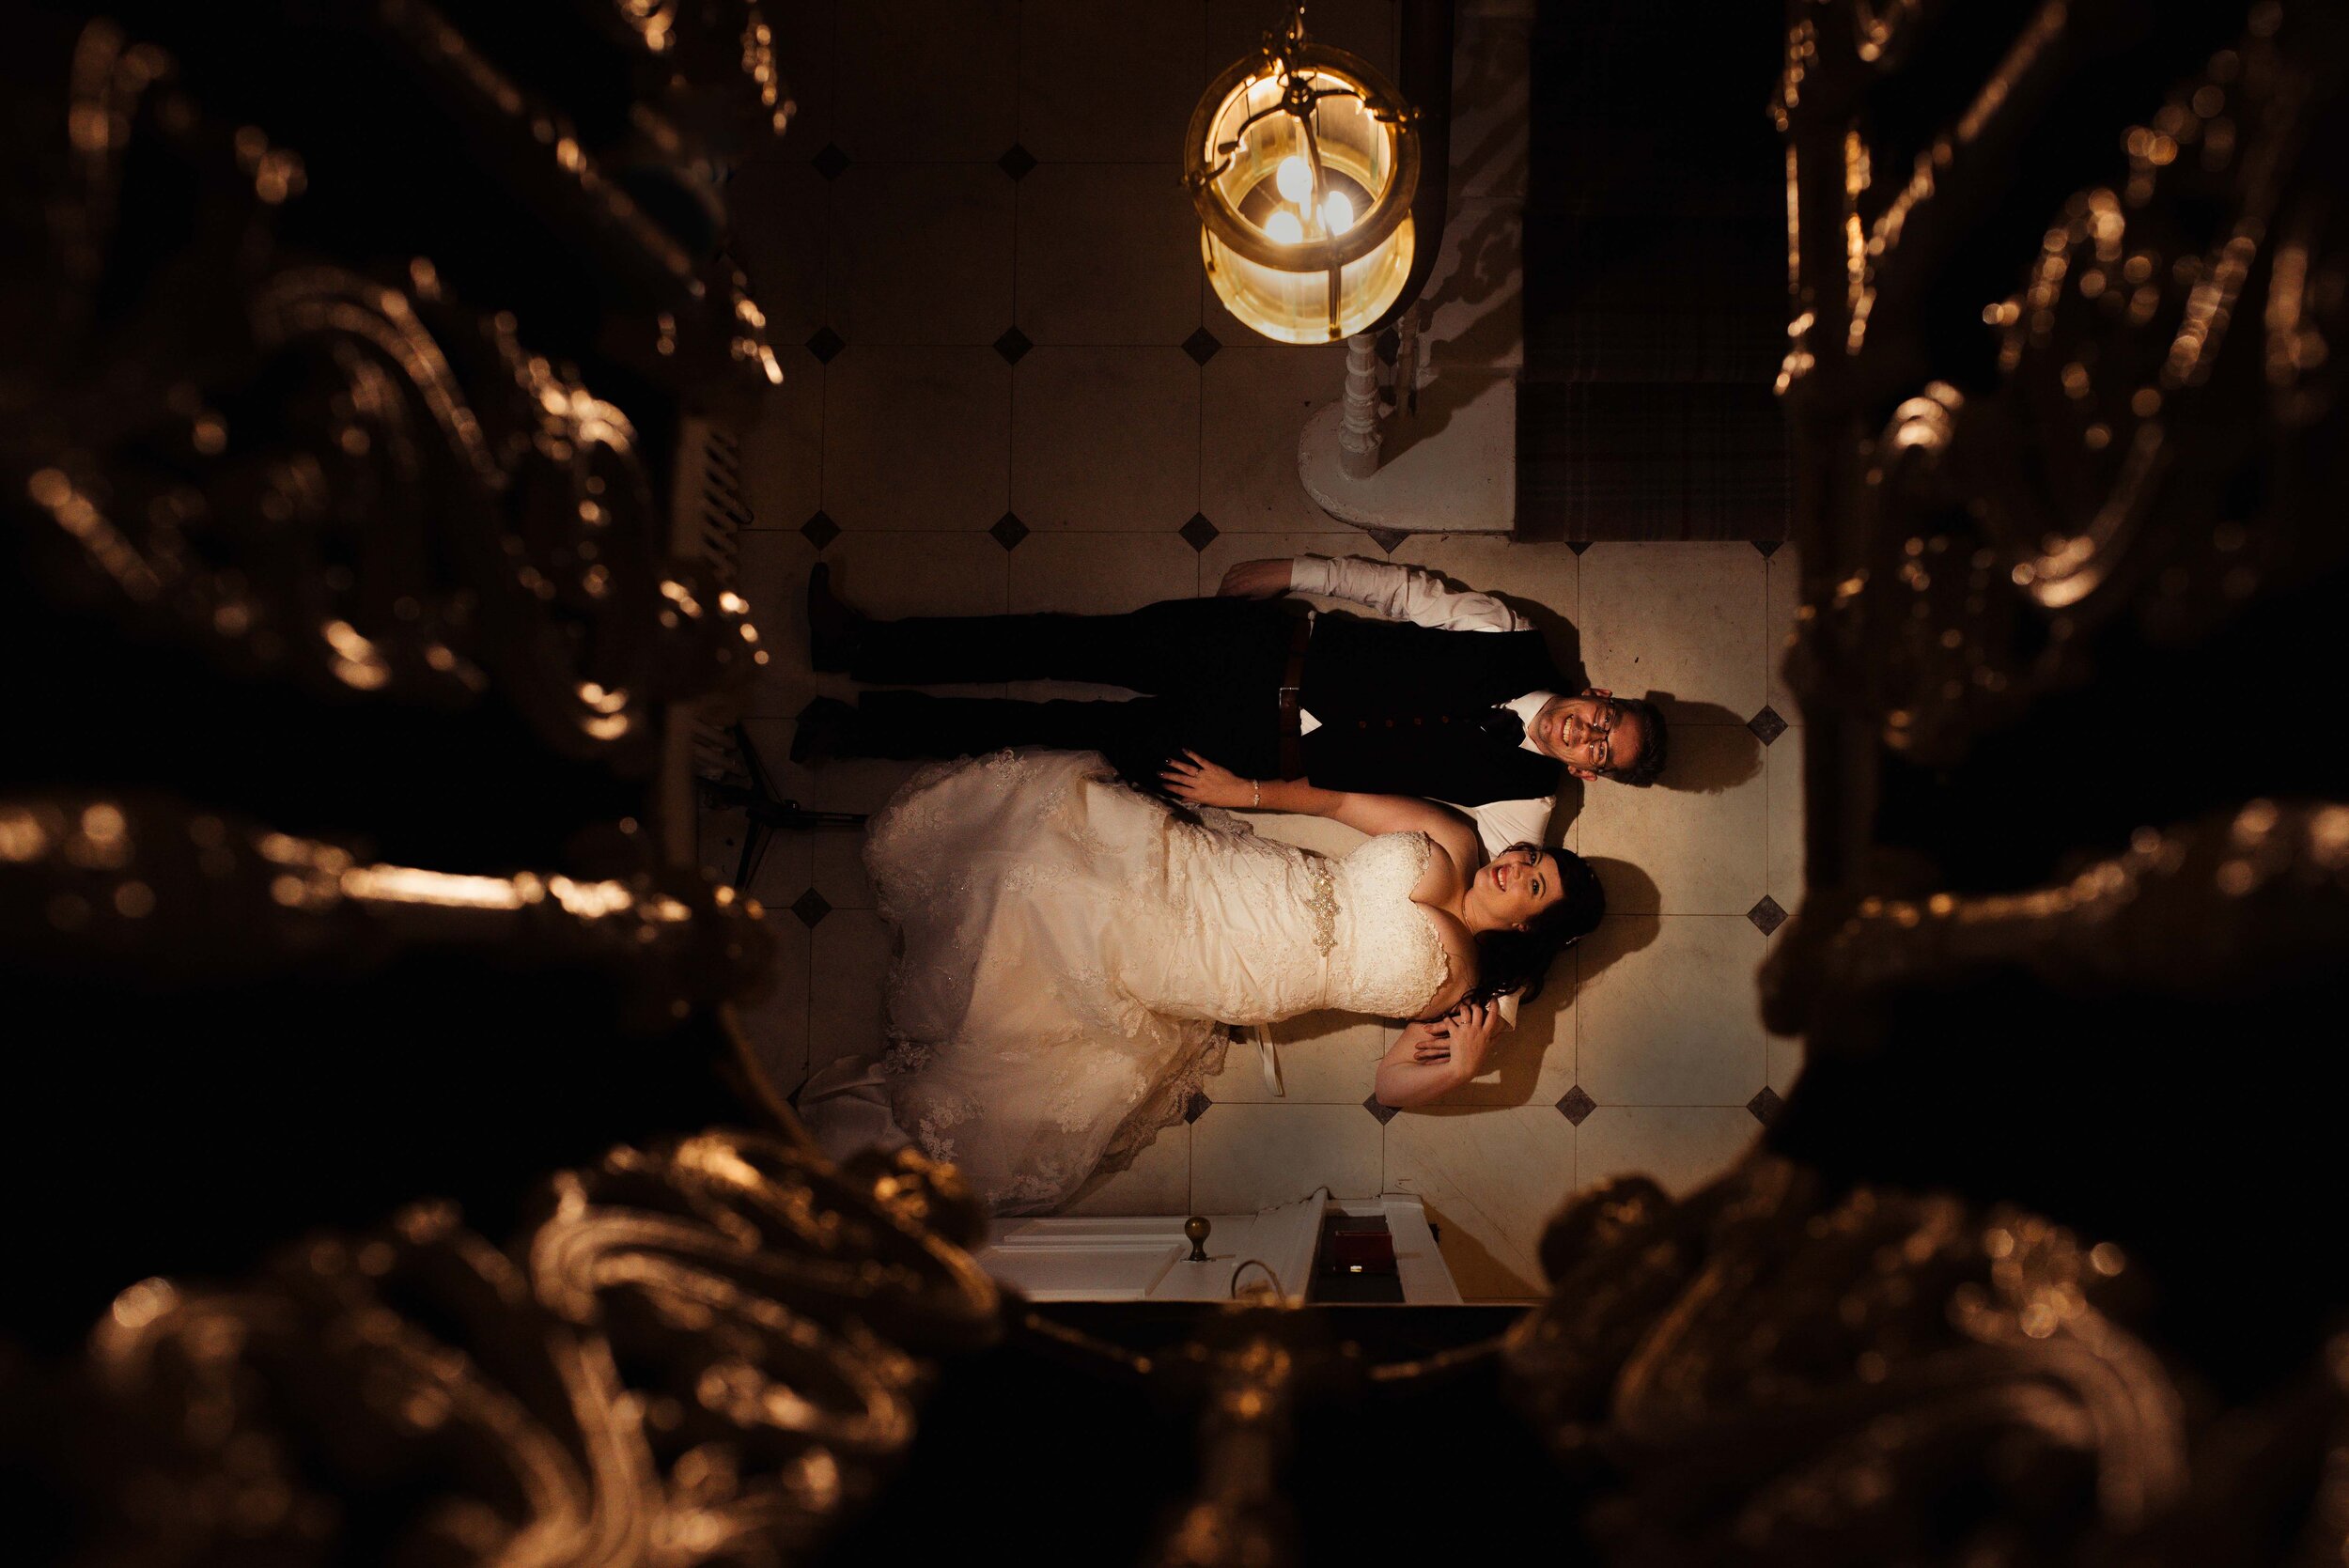 Quirky wedding photography